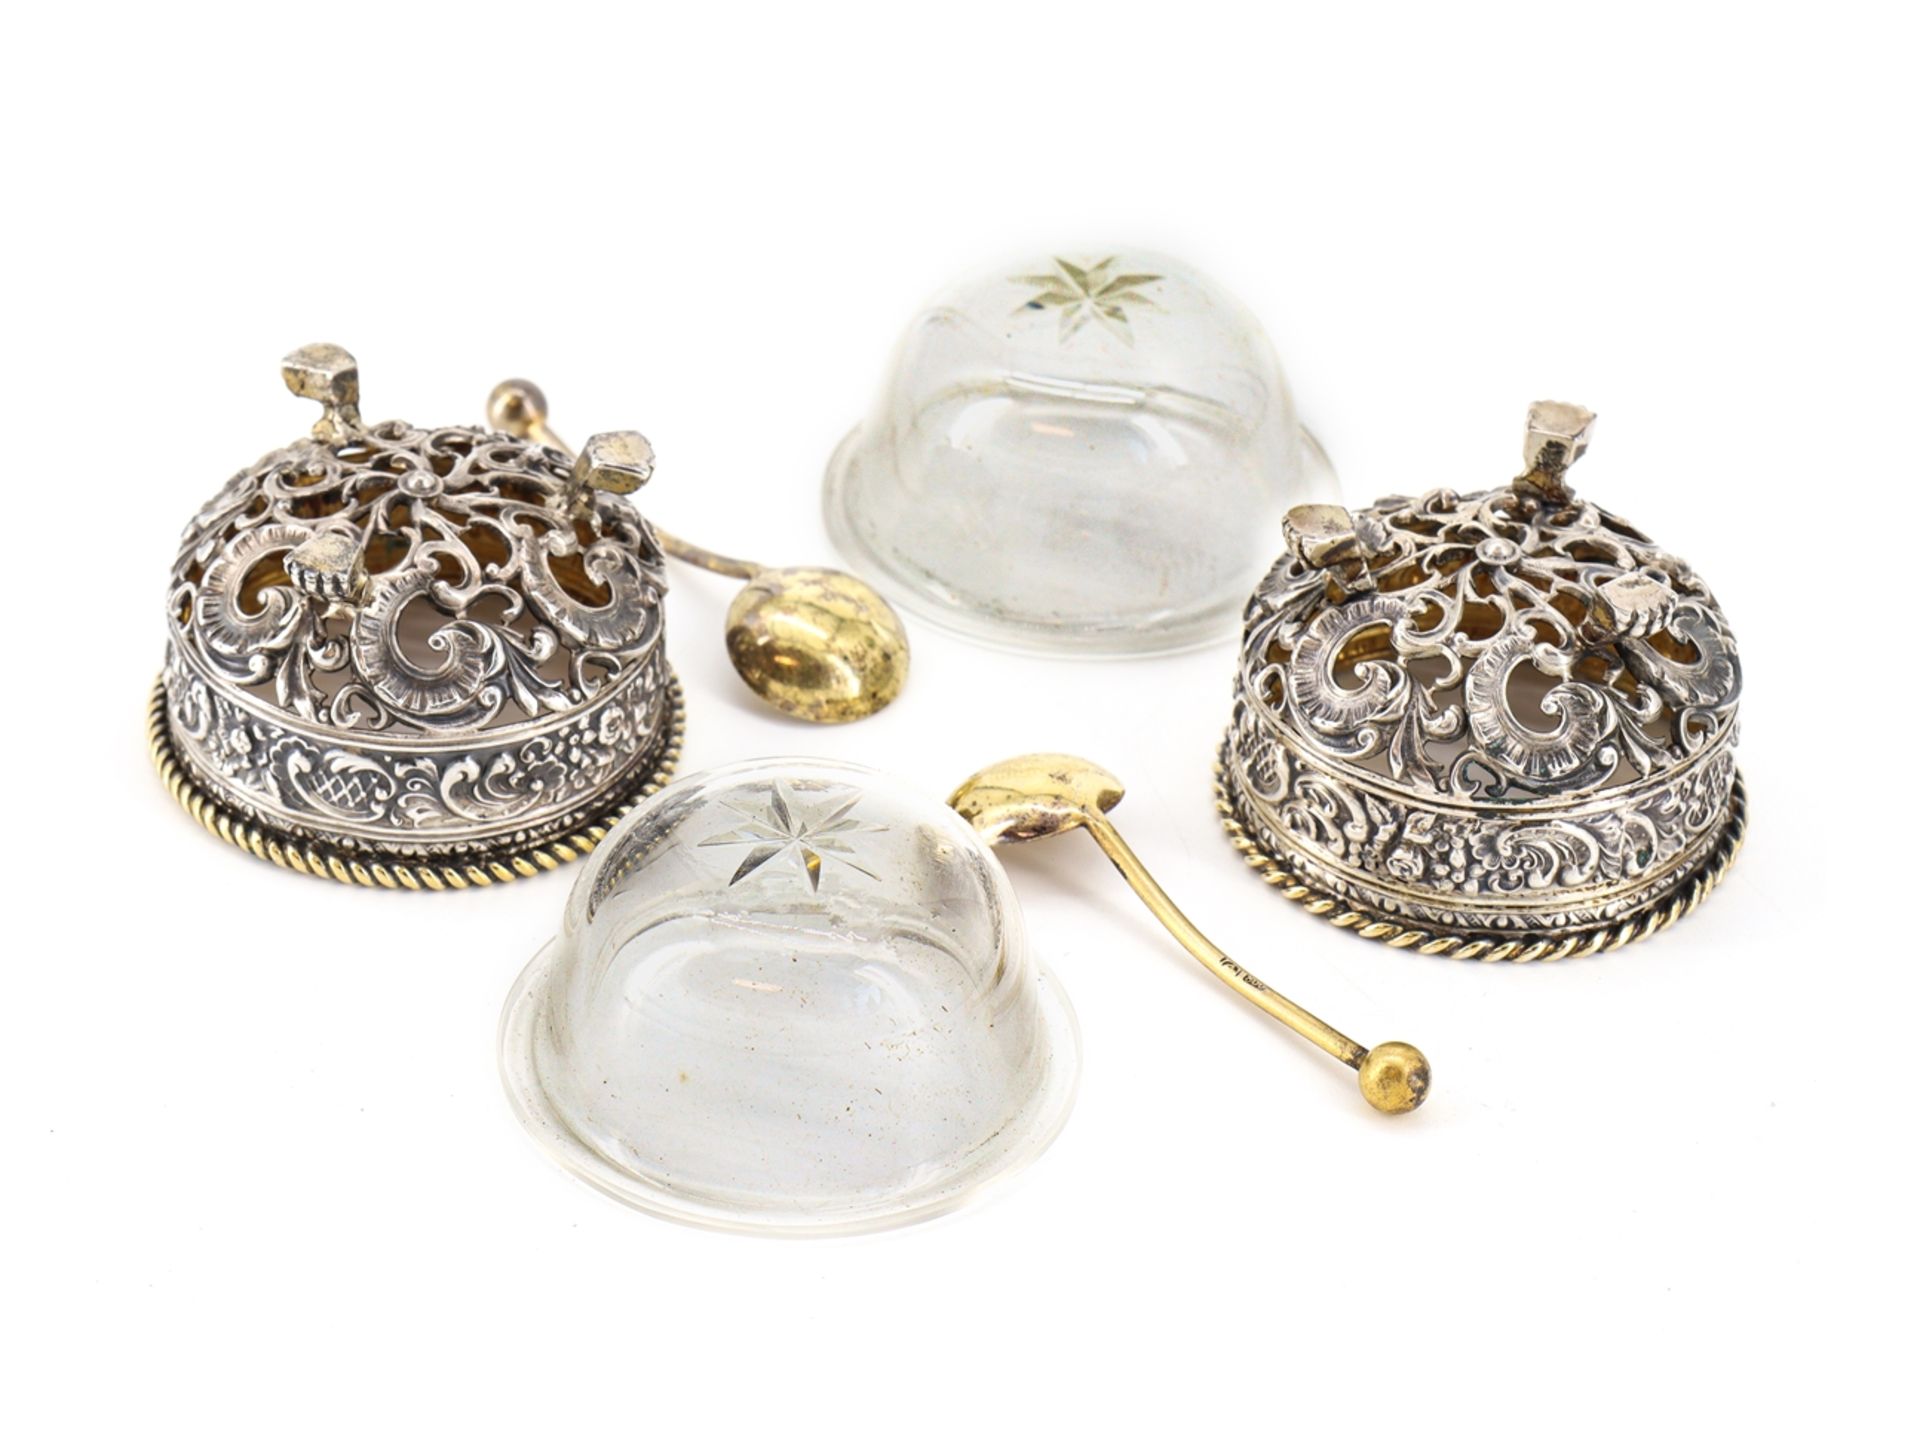 Spice vessels 800 silver, gilded, in case, around 1880 - Image 2 of 5